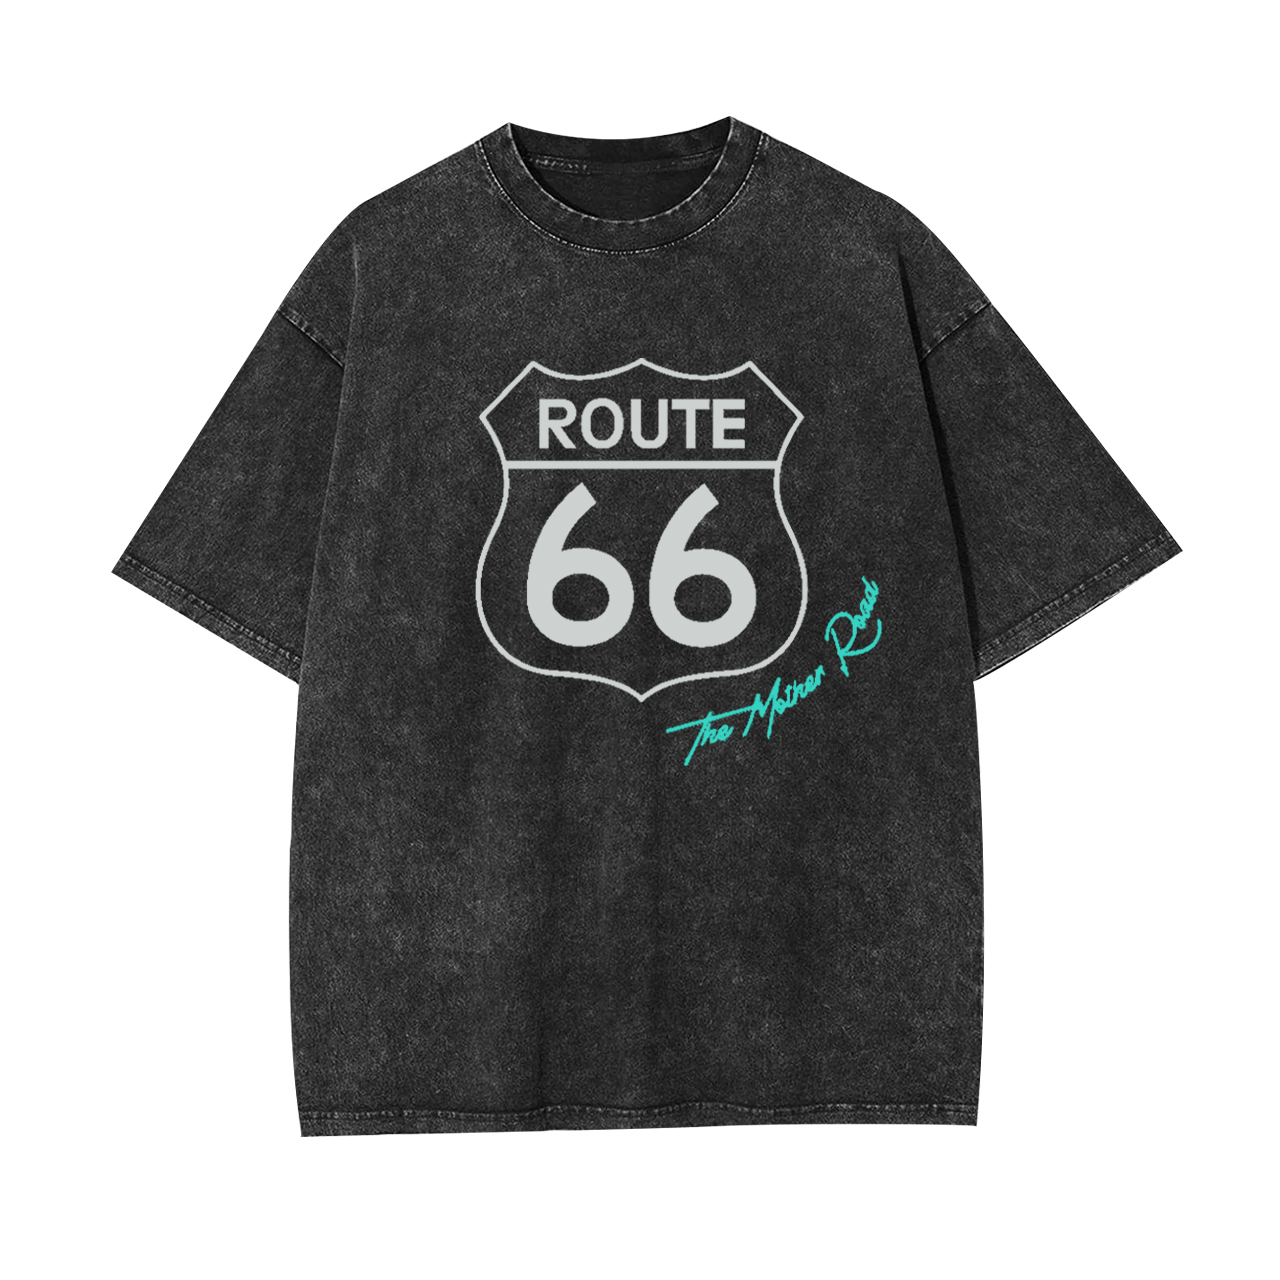 Historic US Route 66 Mother Road Garment-dye Tees